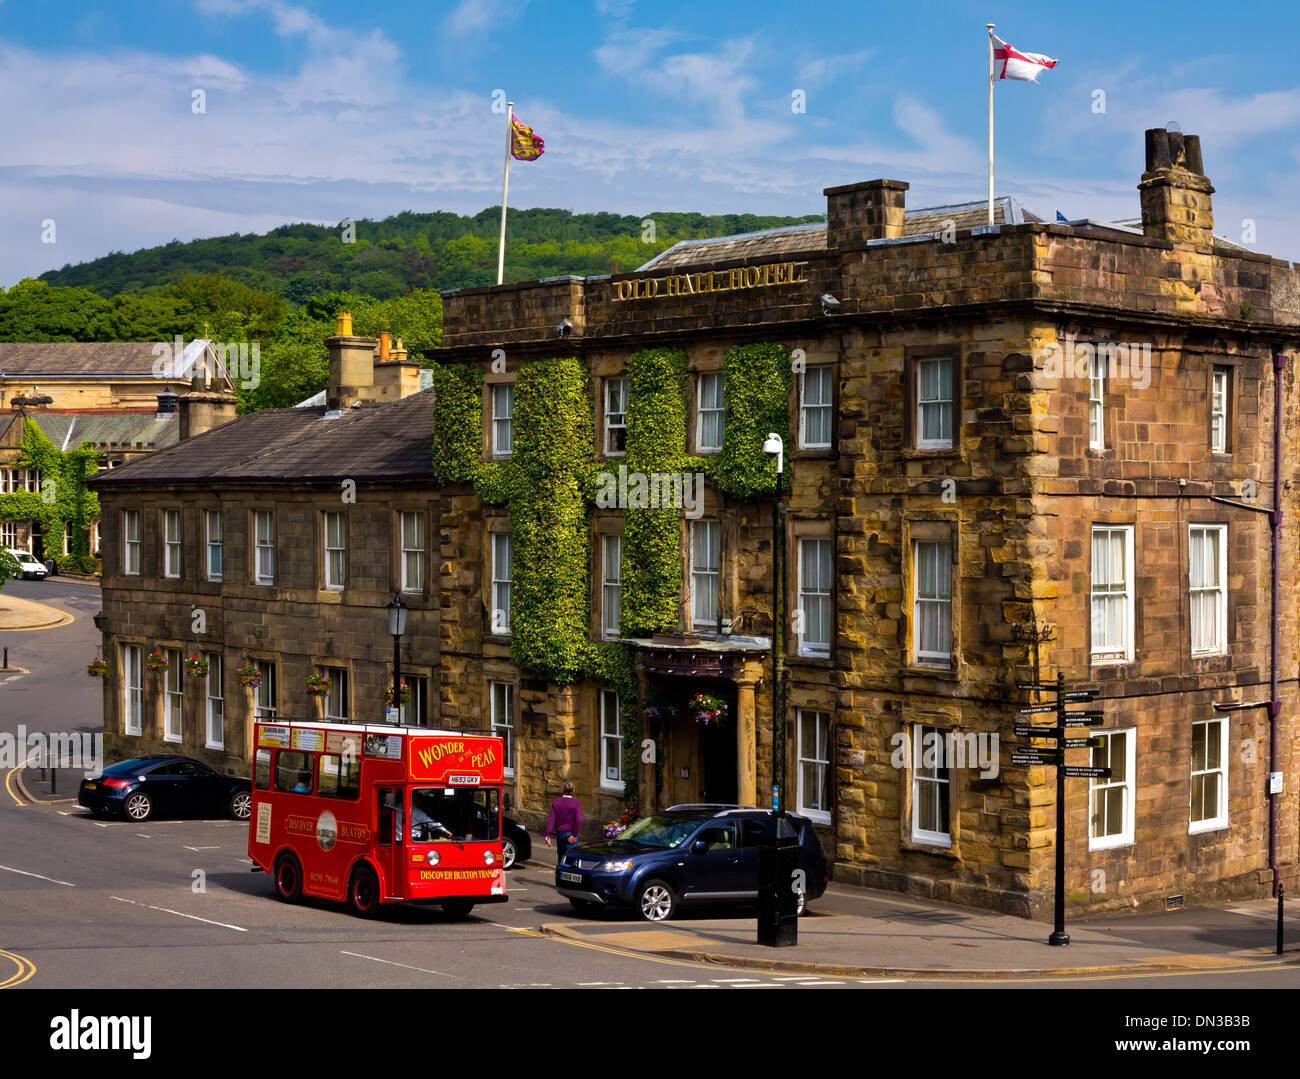 The Wonder of The Peak electric tram in Buxton Derbyshire UK converted from an Electricar milk float and now a tourist vehicle Stock Photo